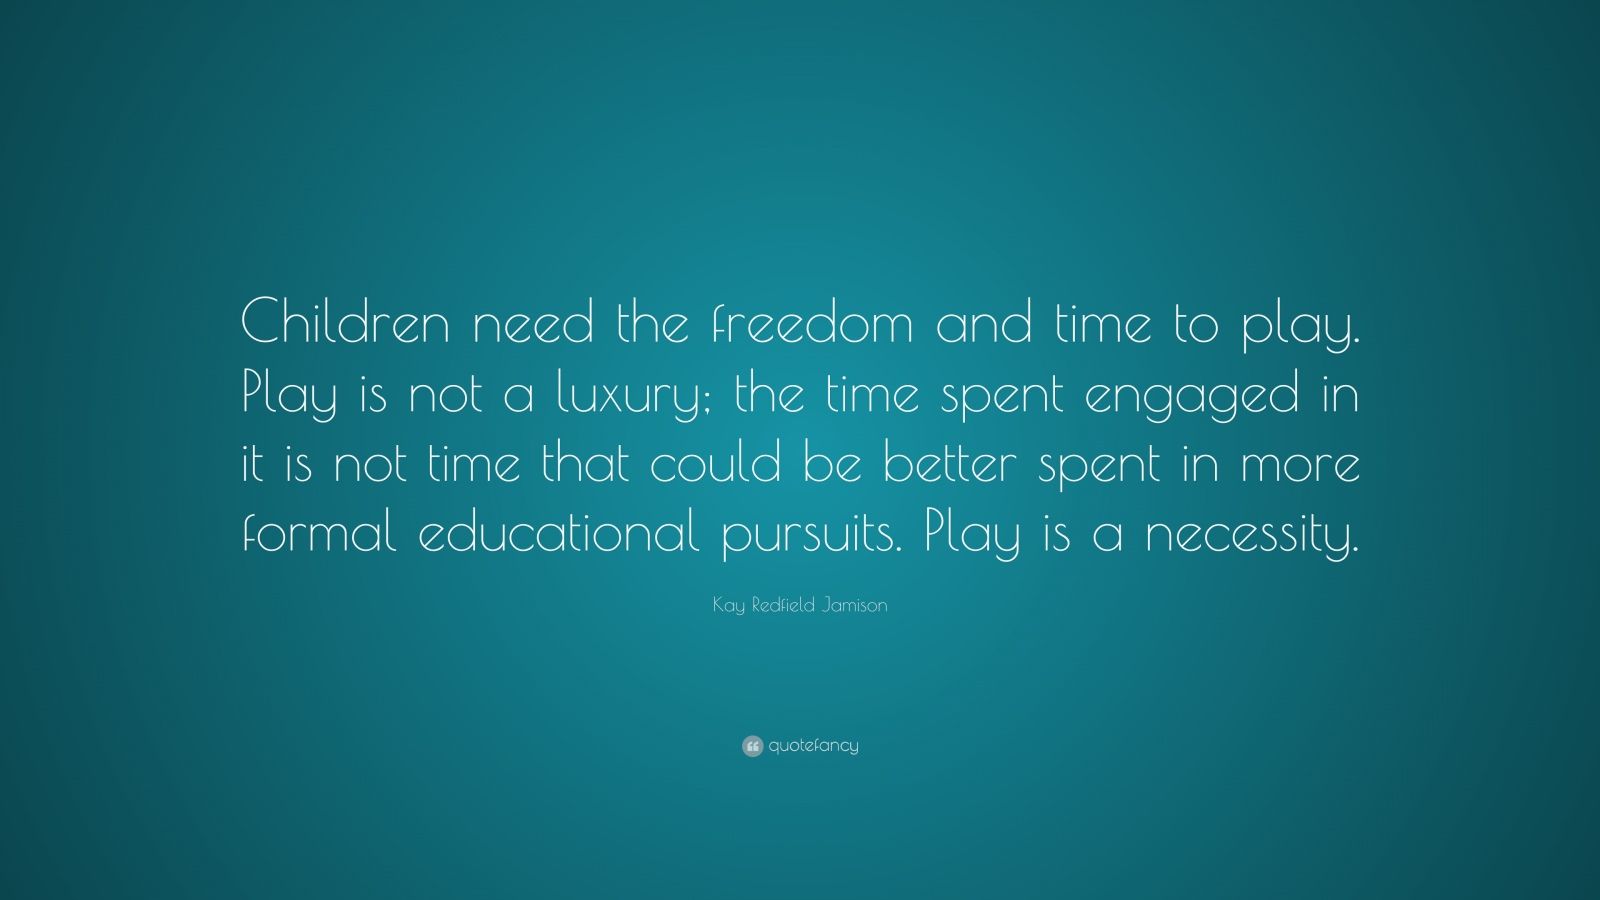 Kay Redfield Jamison Quote: “Children need the freedom and time to play